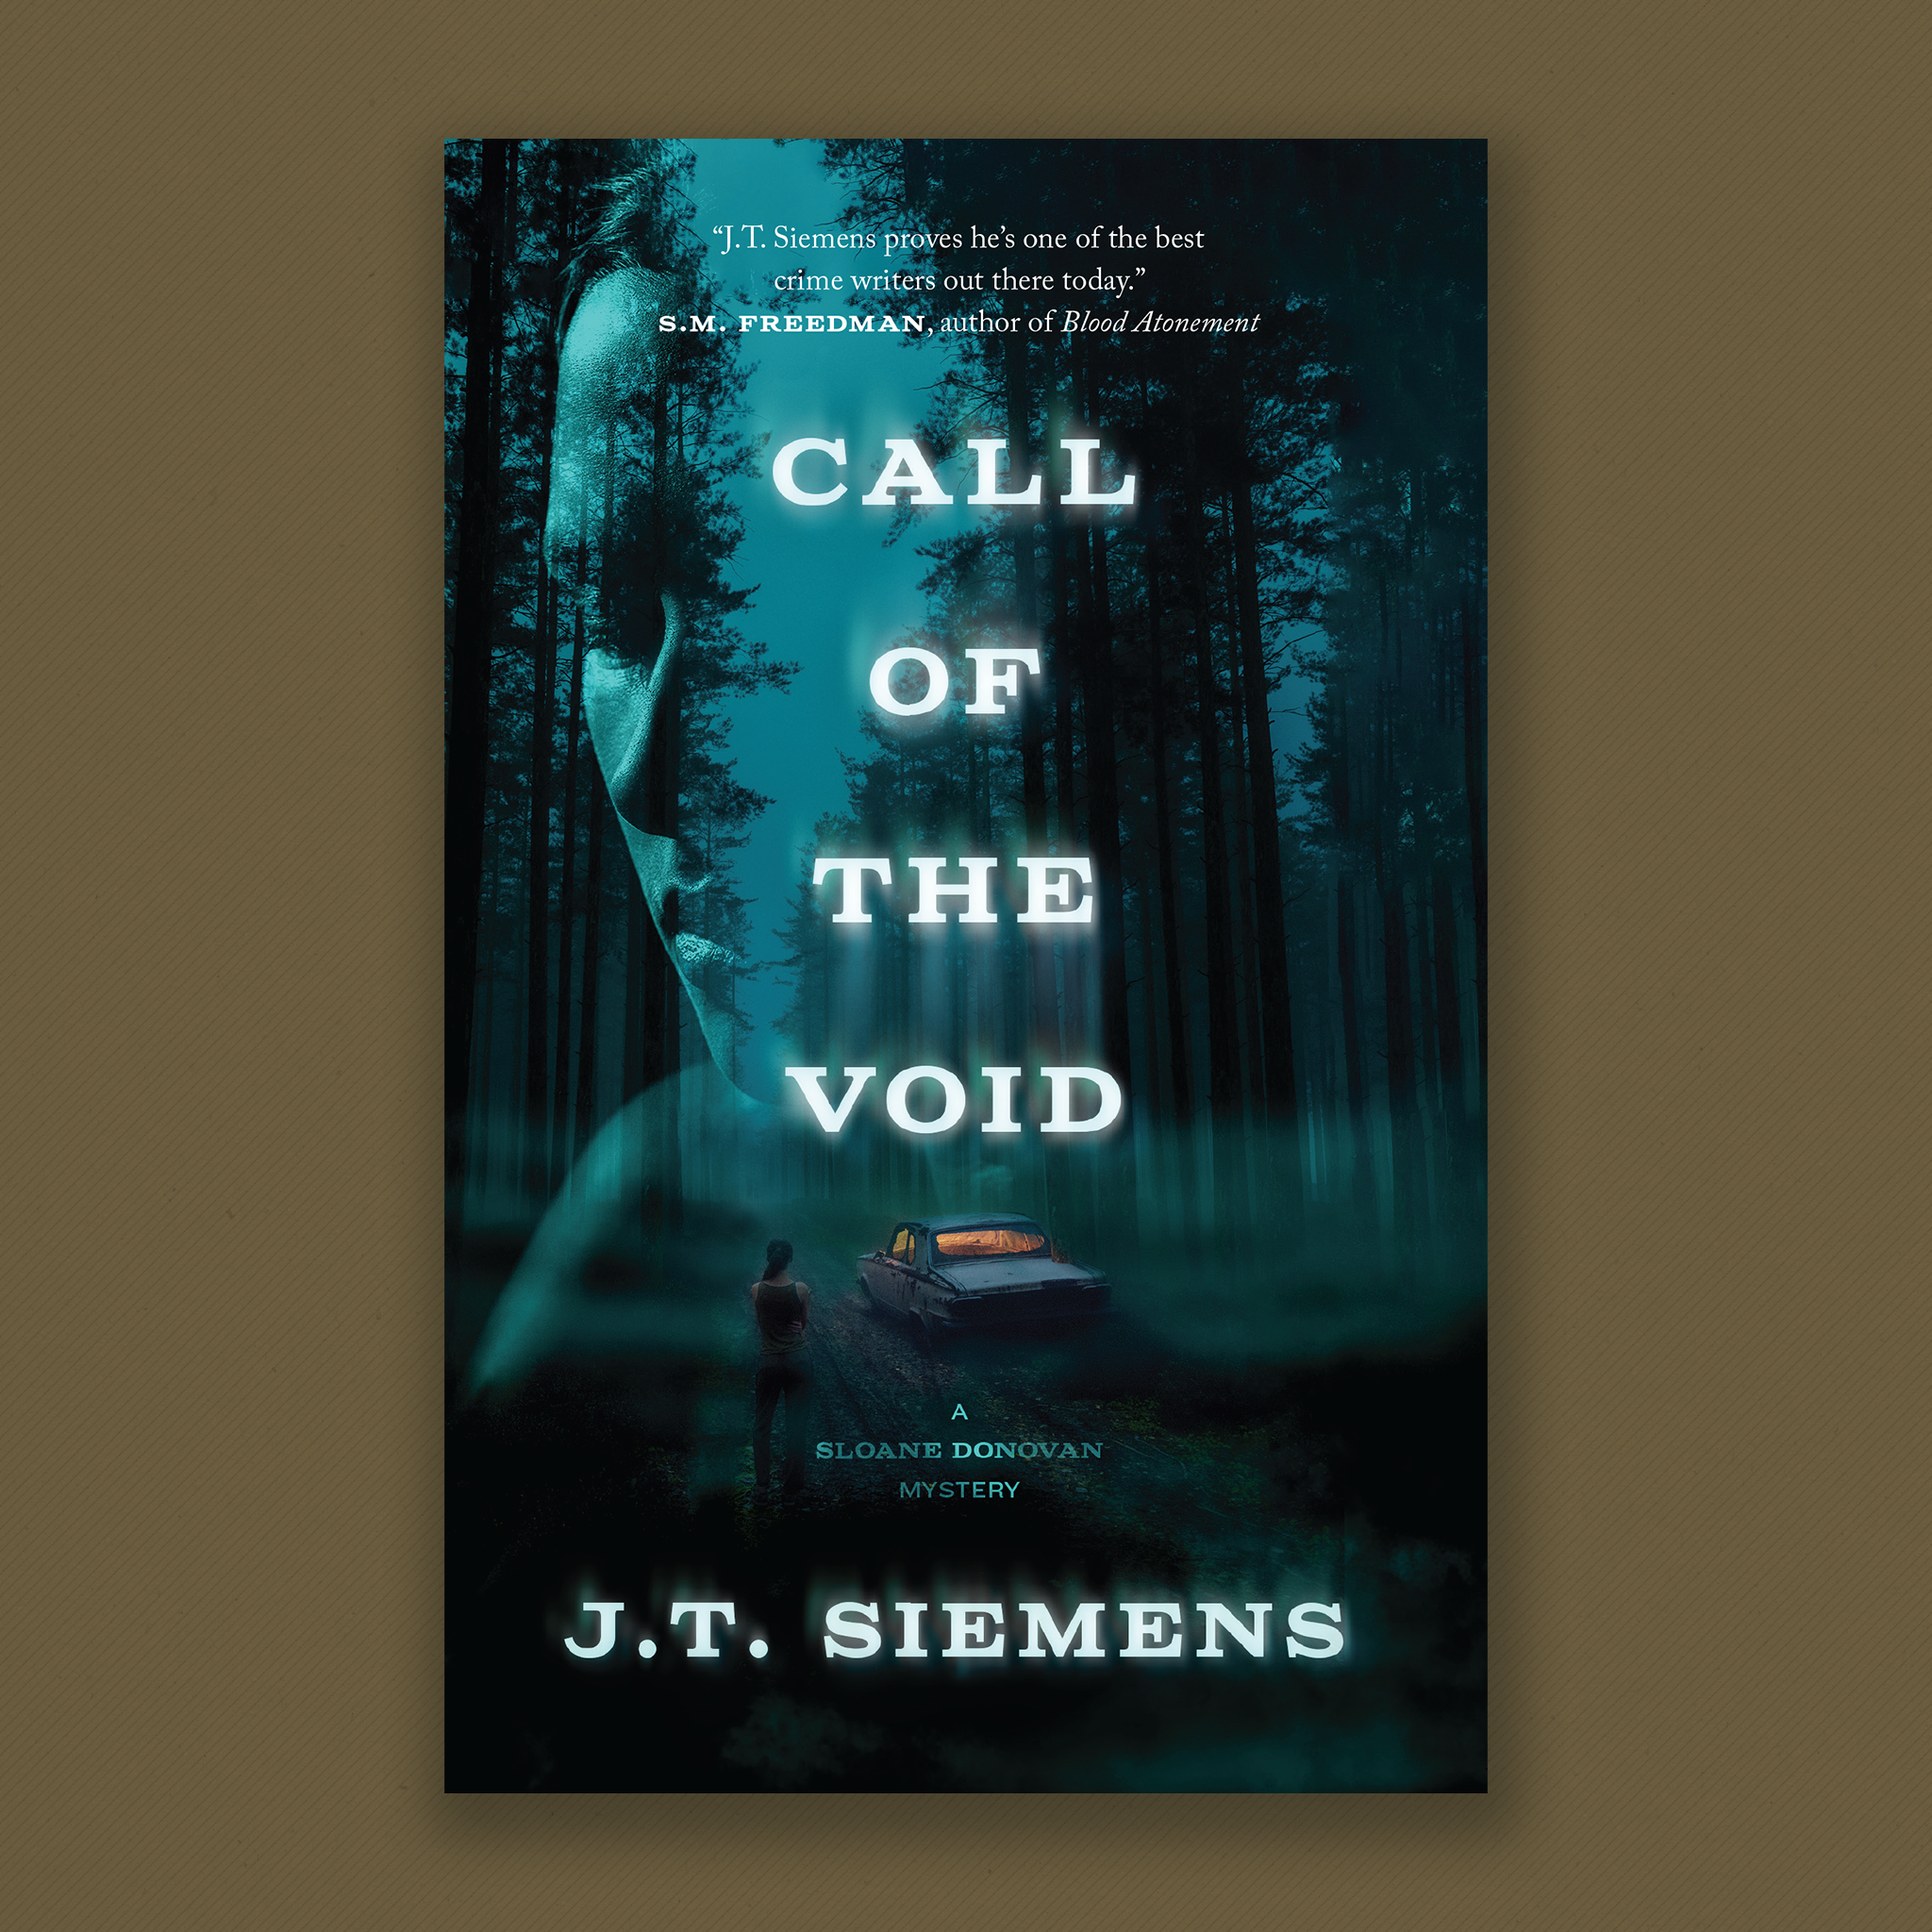 Book Cover: Call of the Void by J.T. Siemens. A Sloane Donovan Mystery. A dirt road runs through a forest of tall, thin trees in bluish light. A woman stands with her back to the viewer, staring at a delipidated car with an illuminated interior. Cover blurb: J.T. Siemens proves he’s one of the best crime writers out there today. S.M. Freedman, author of Blood Atonement.